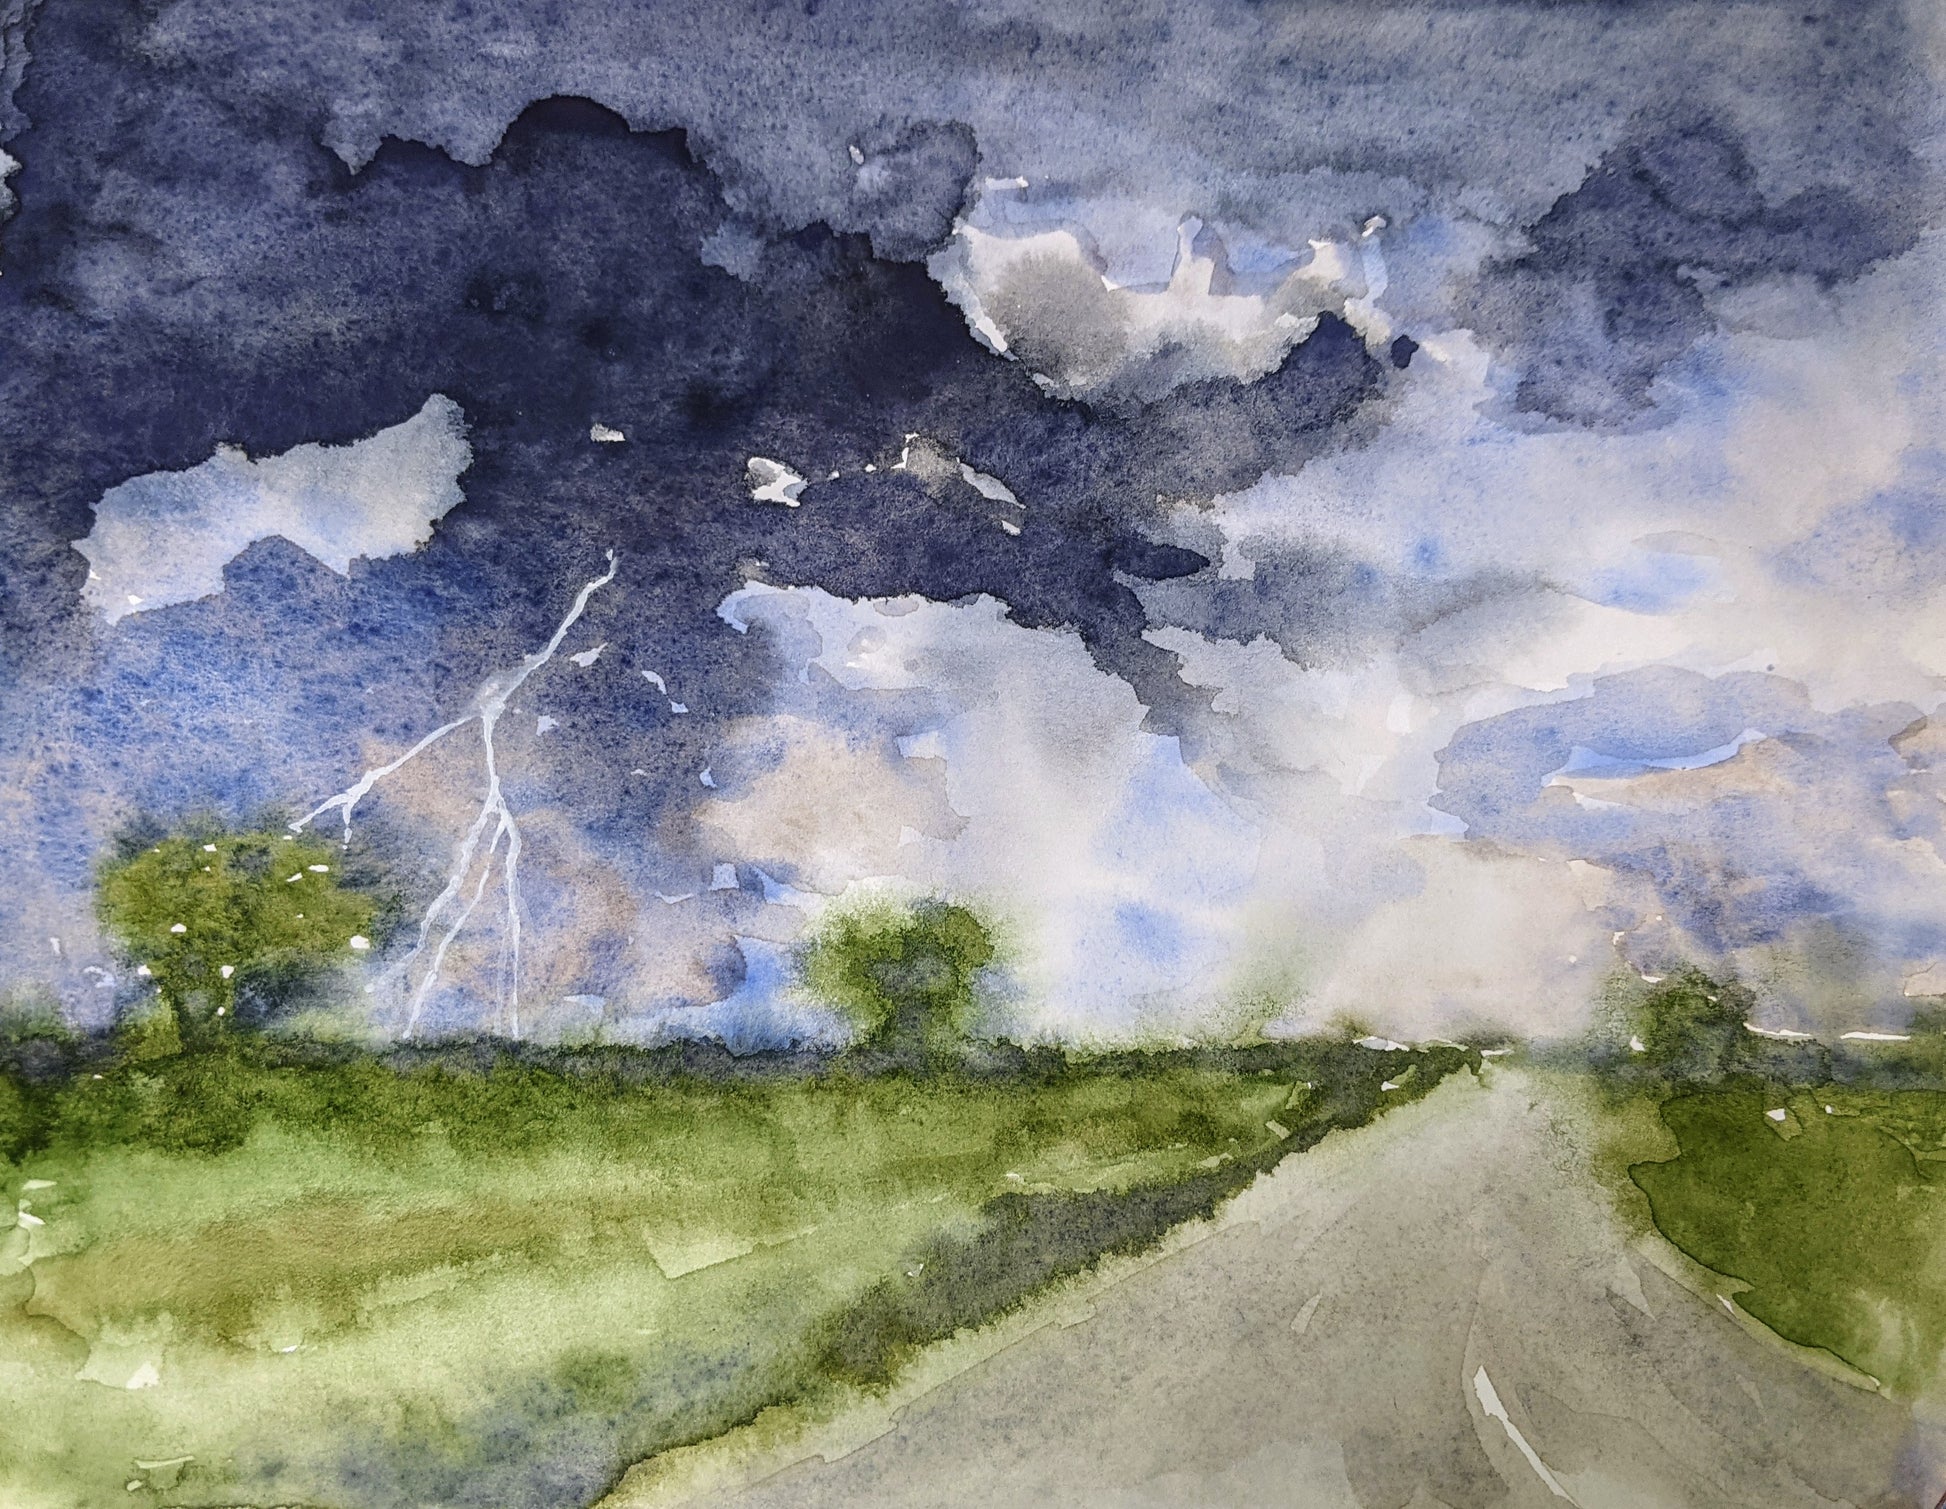 Driving into Storm on I-70 watercolor painting on paper